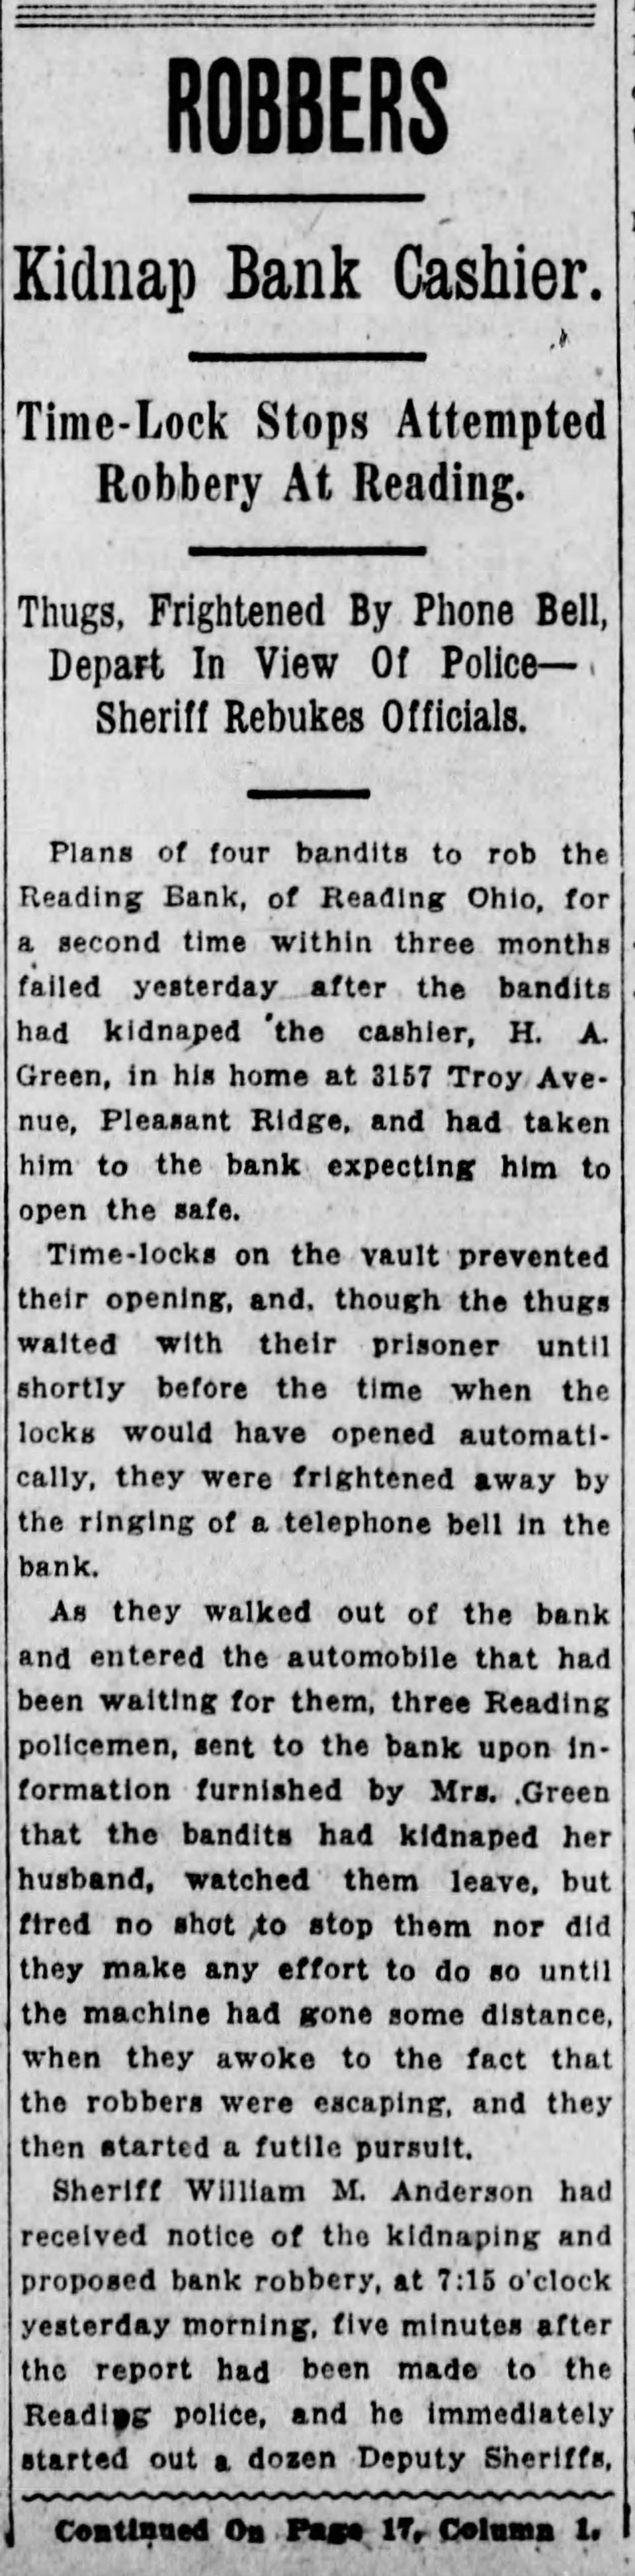 The headline from The Cincinnati Enquirer on June 22, 1930, was the entry point to a story of a bank robbery gang in Cincinnati.